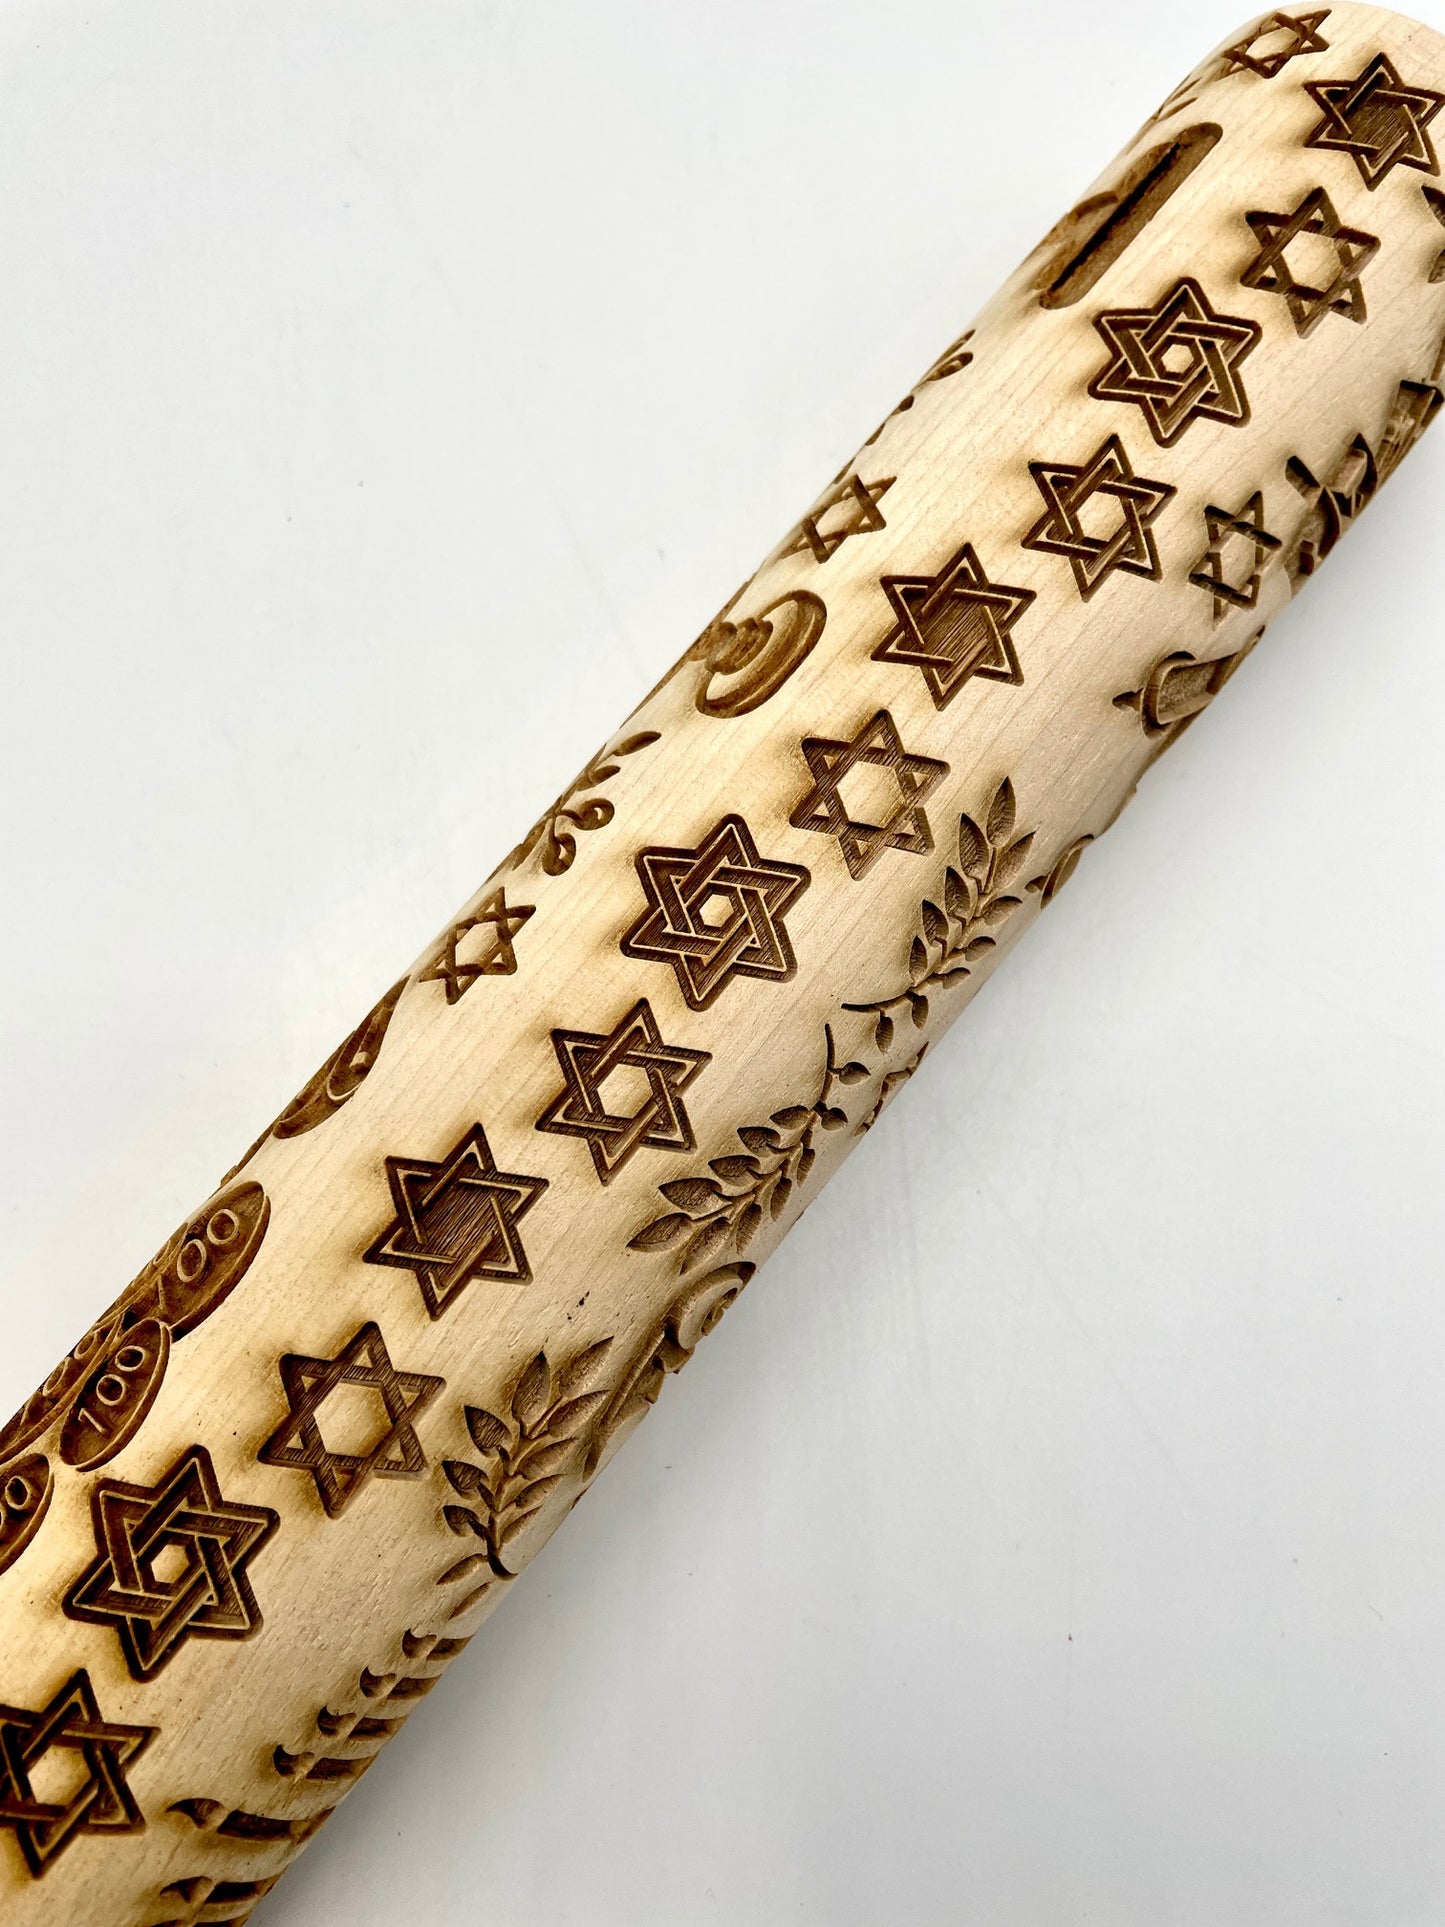 Hanukkah Textured Rolling Pin **NOTE - The engraving has been corrected so the numbers & Hebrew letters transfer to the clay in the correct orientation.  The photographs on this product have not been updated to reflect the correction***